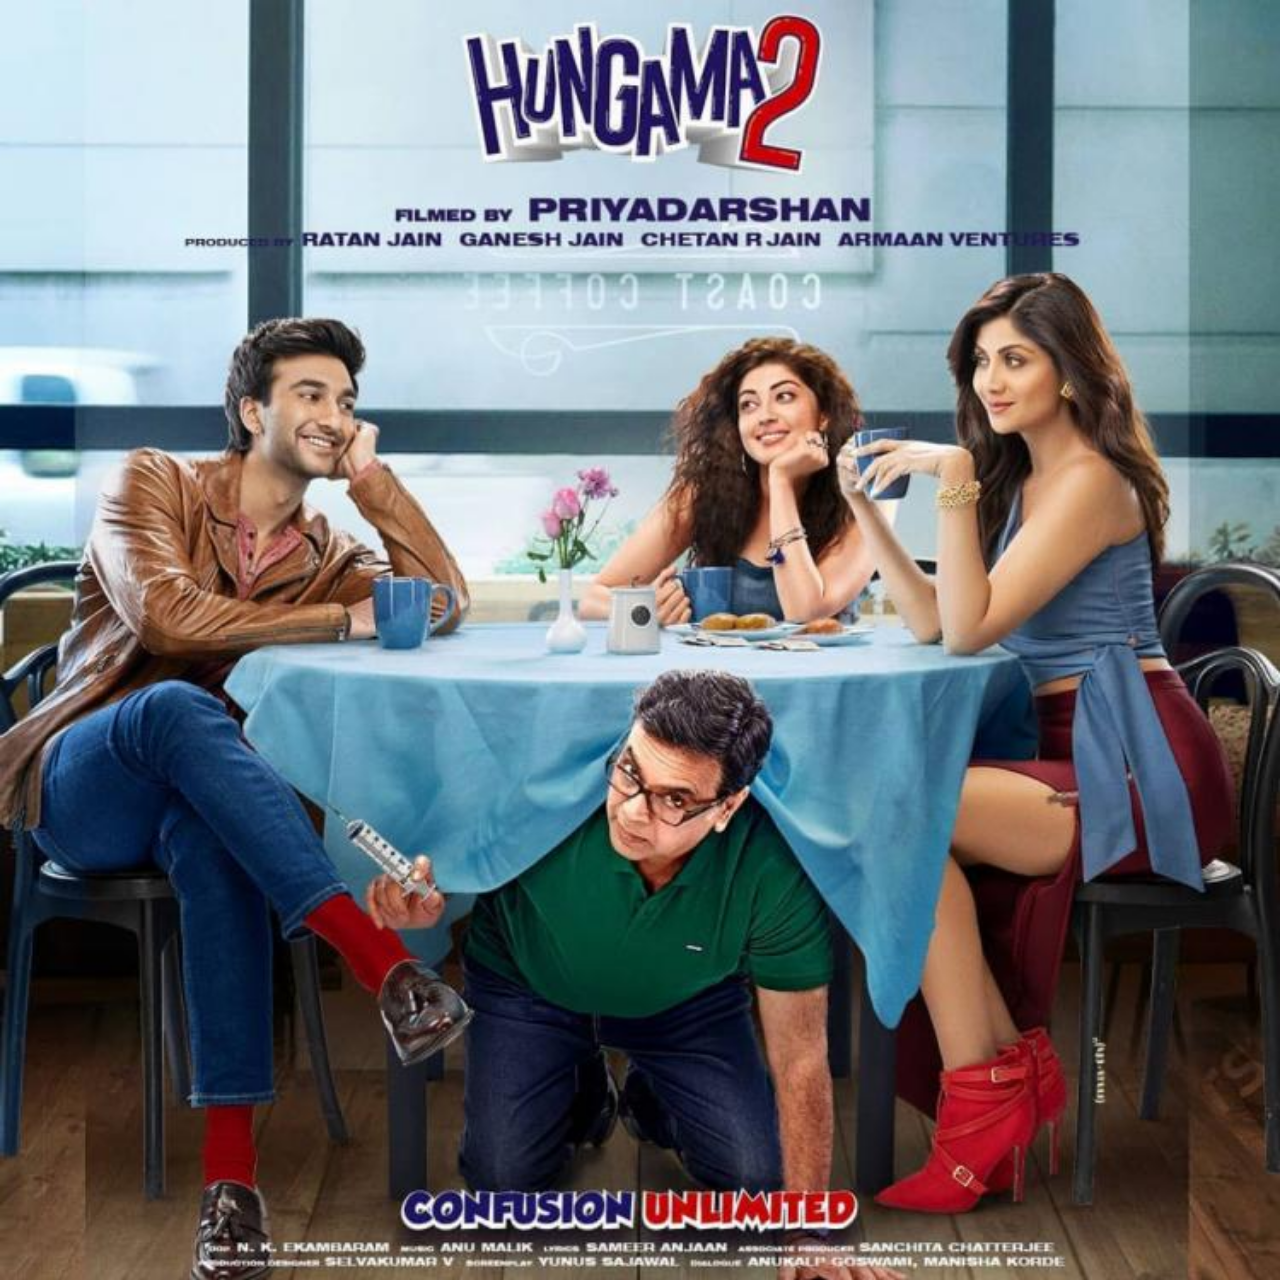 Hungama 2 - Movie Cast & Crew, Release Date, Budget, Trailer, Story and More